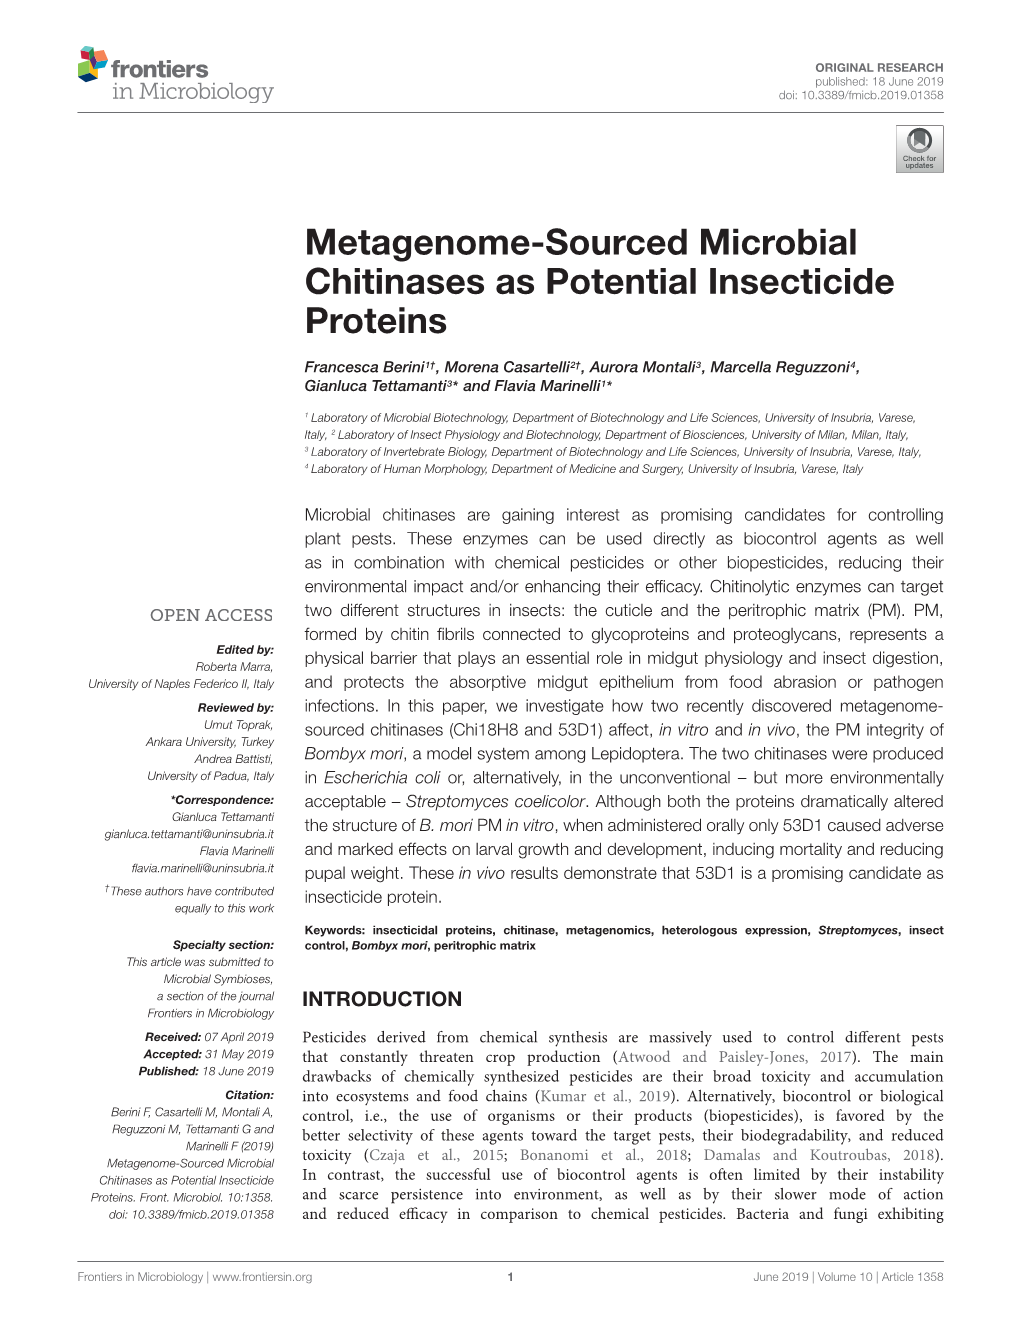 Metagenome-Sourced Microbial Chitinases As Potential Insecticide Proteins